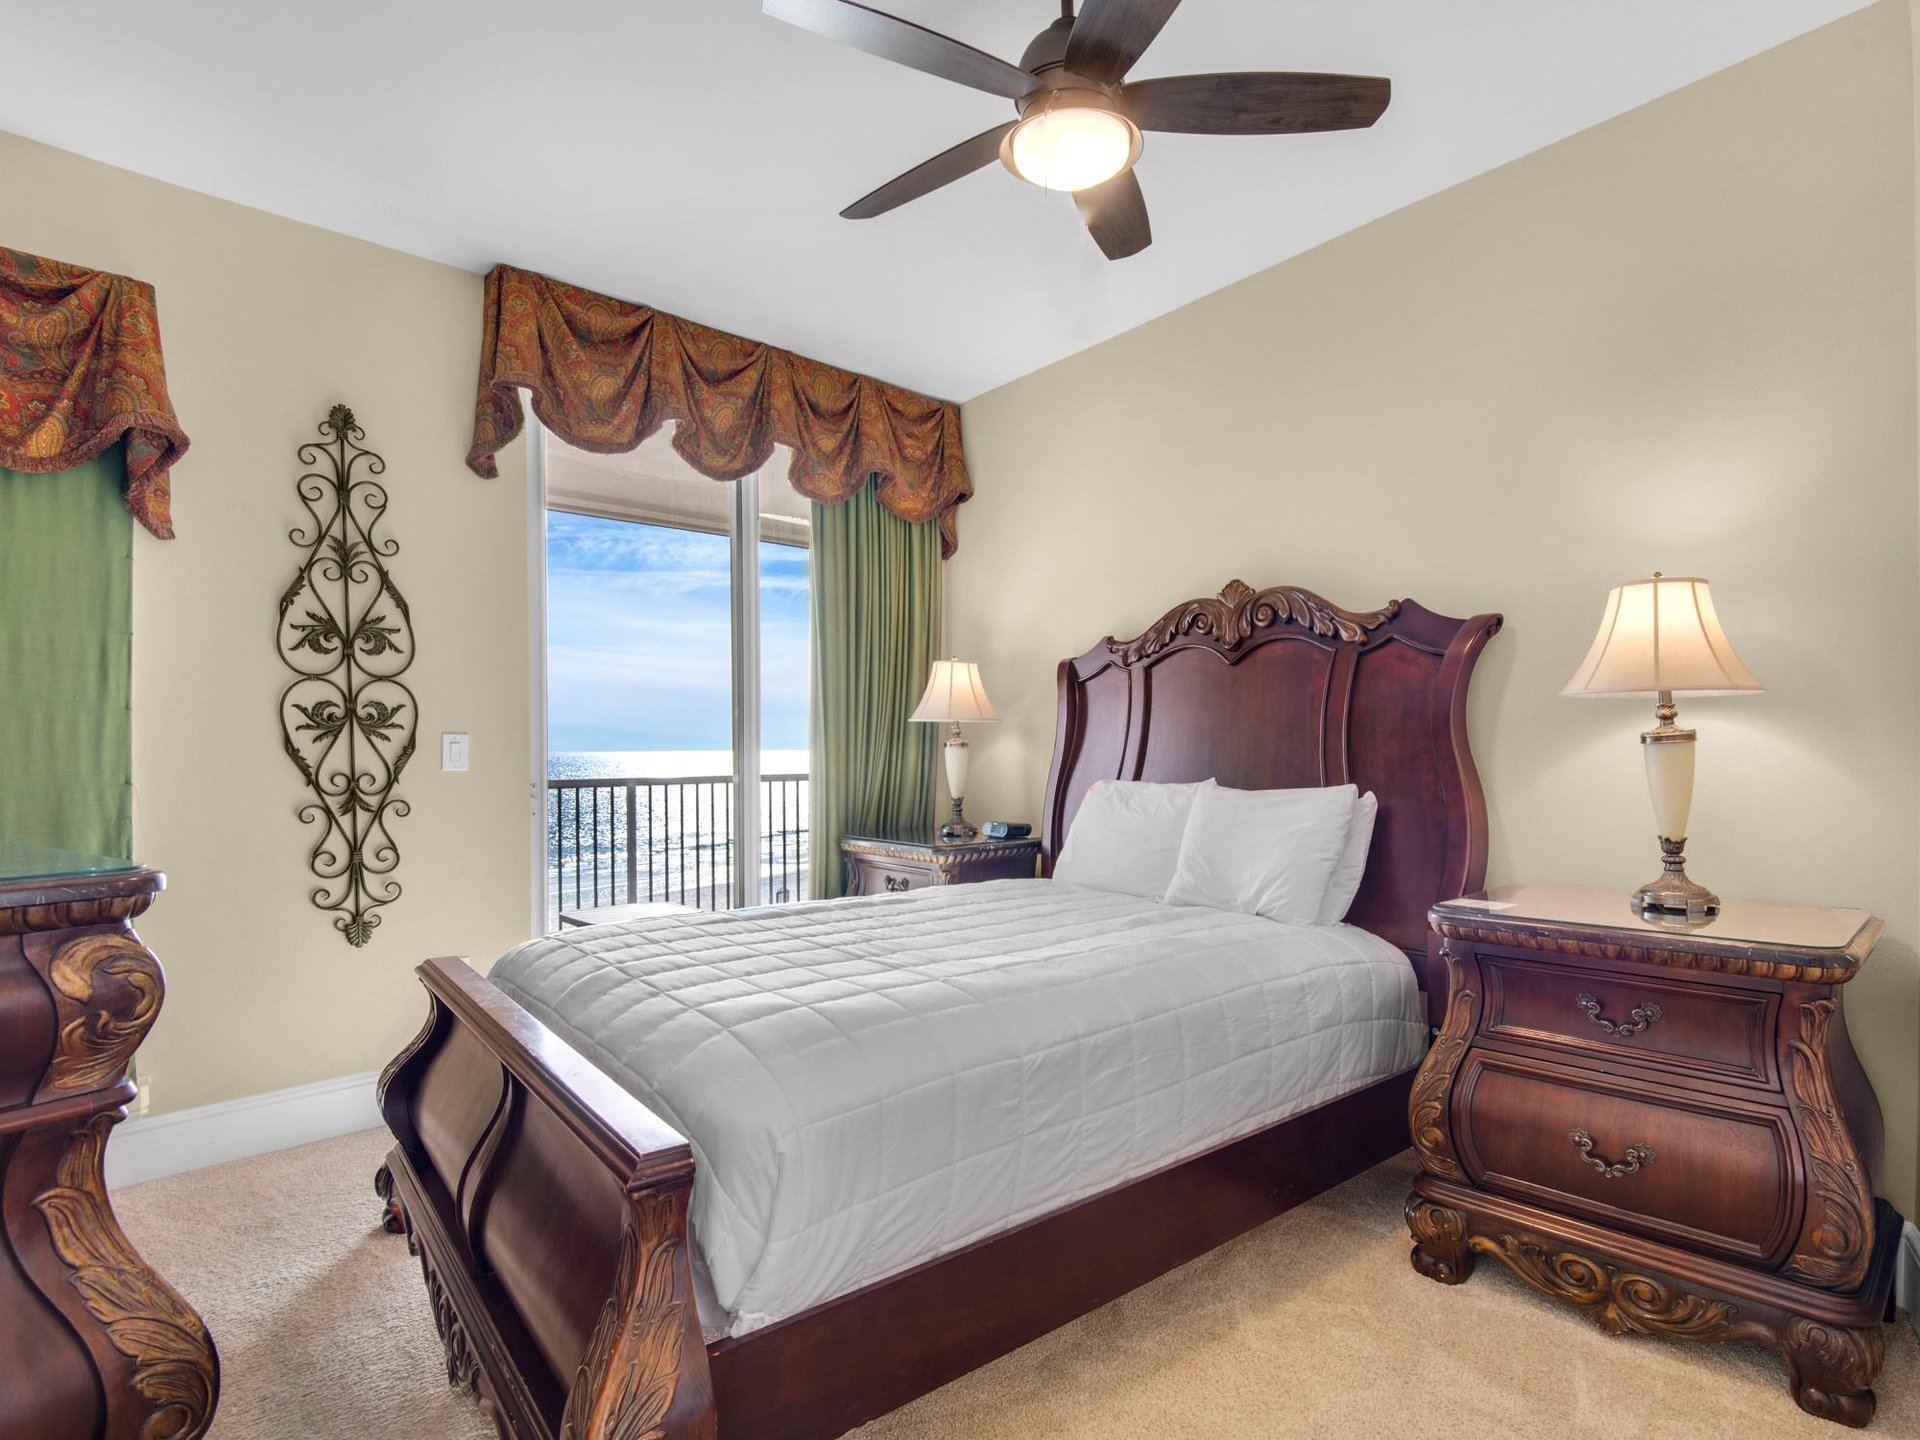 Bedroom 2 with Queen Bed and Balcony Access Providing Gulf Views